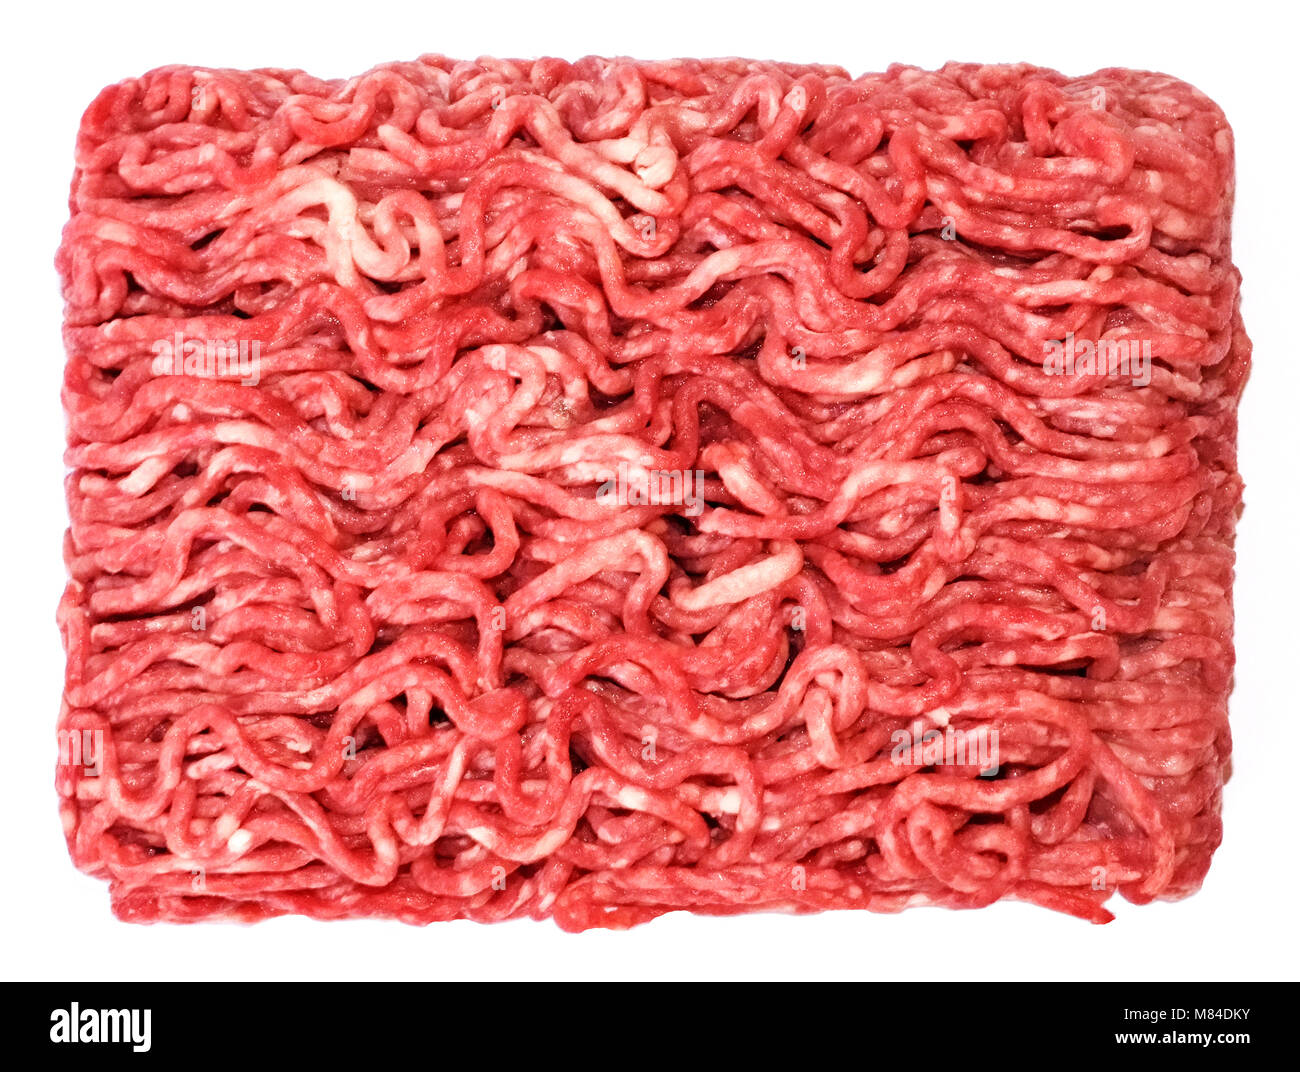 Raw minced meat or beef meat, isolated on white background. Fresh meat, cooking ingredient. high angle view. Stock Photo